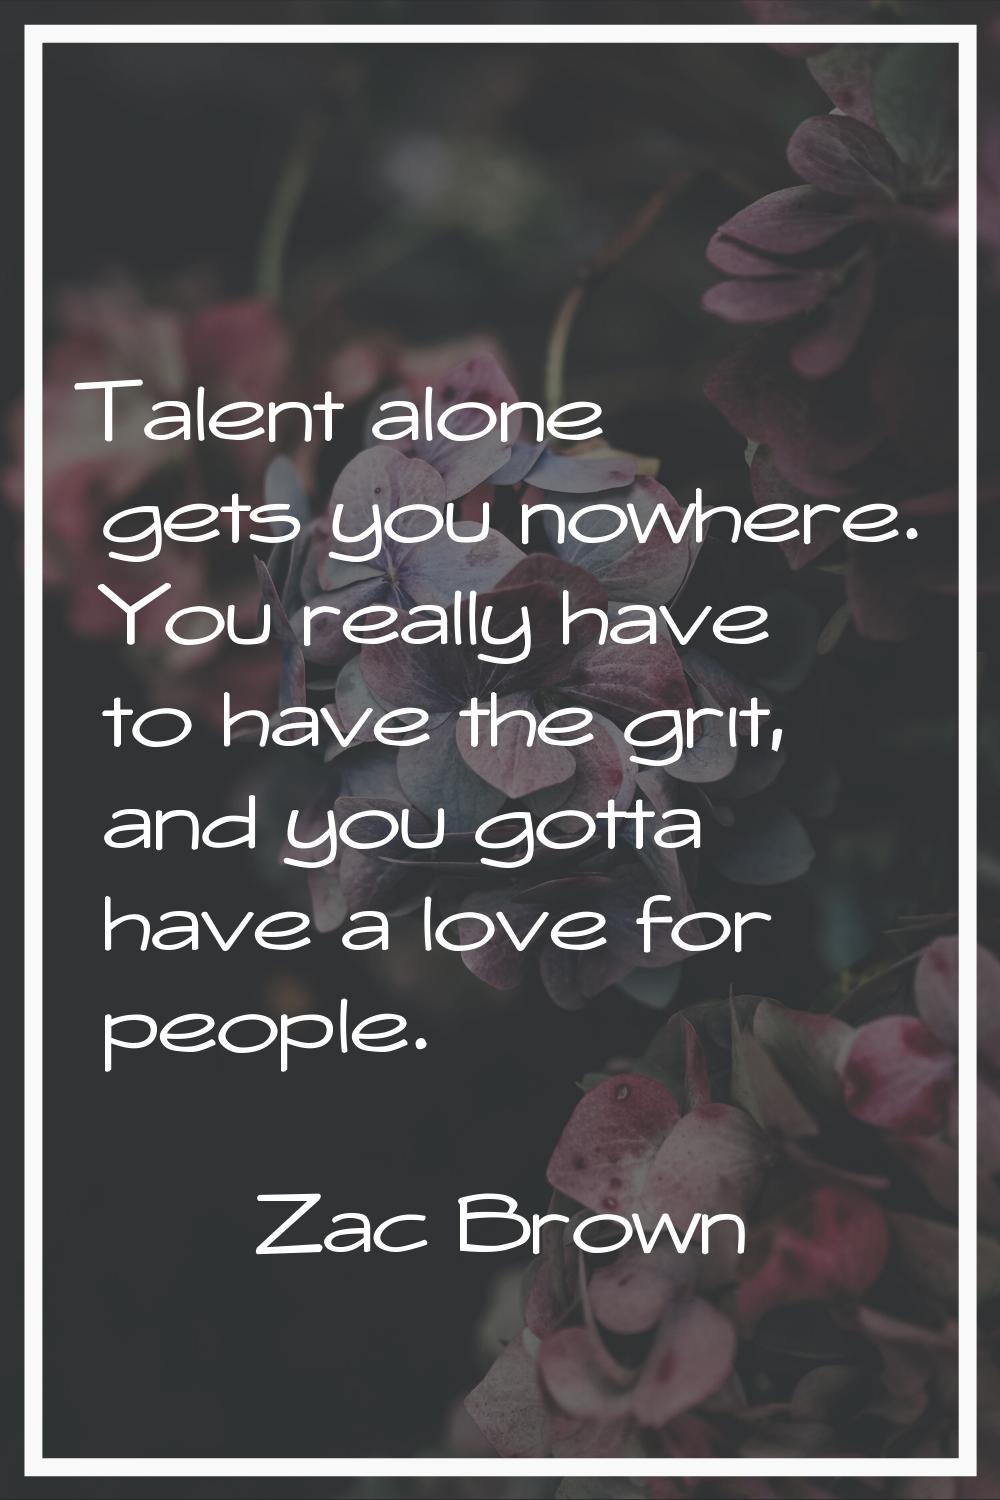 Talent alone gets you nowhere. You really have to have the grit, and you gotta have a love for peop